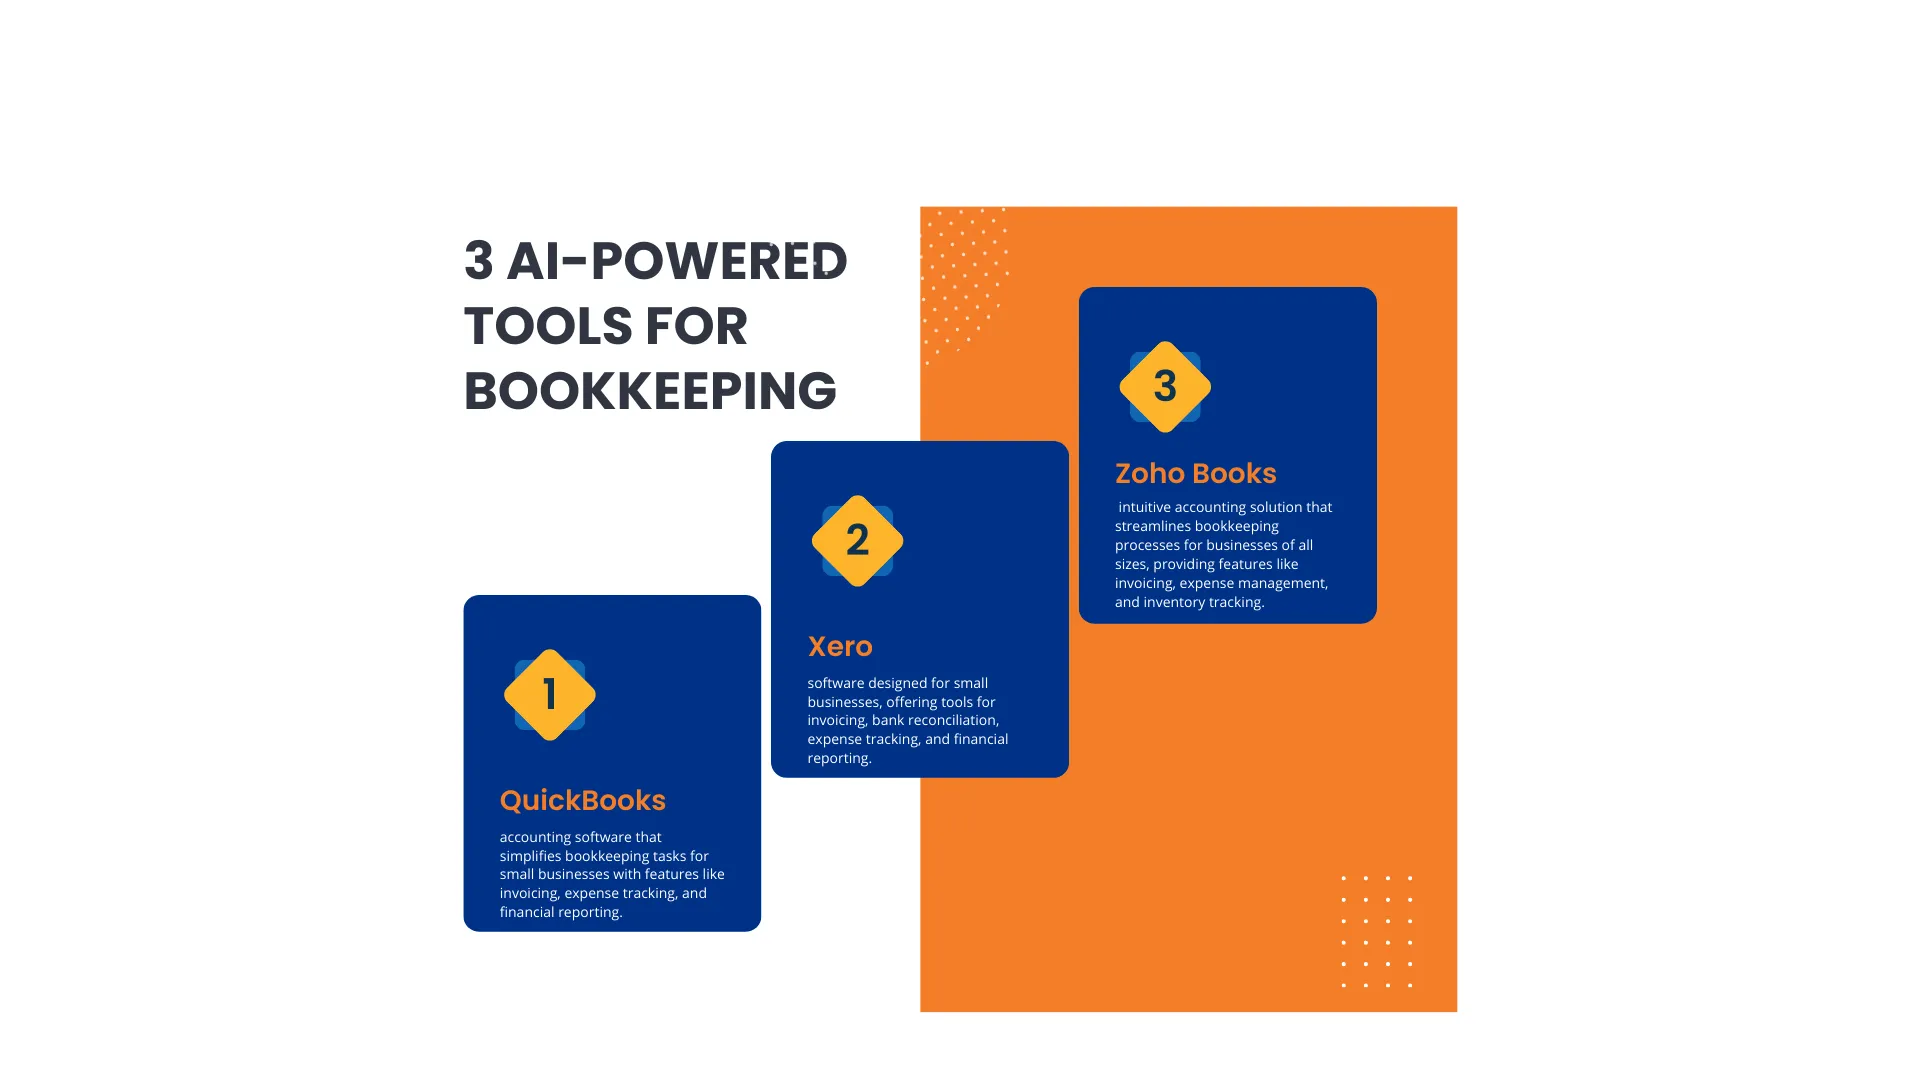 3 AI-powered automated bookkeeping tools.